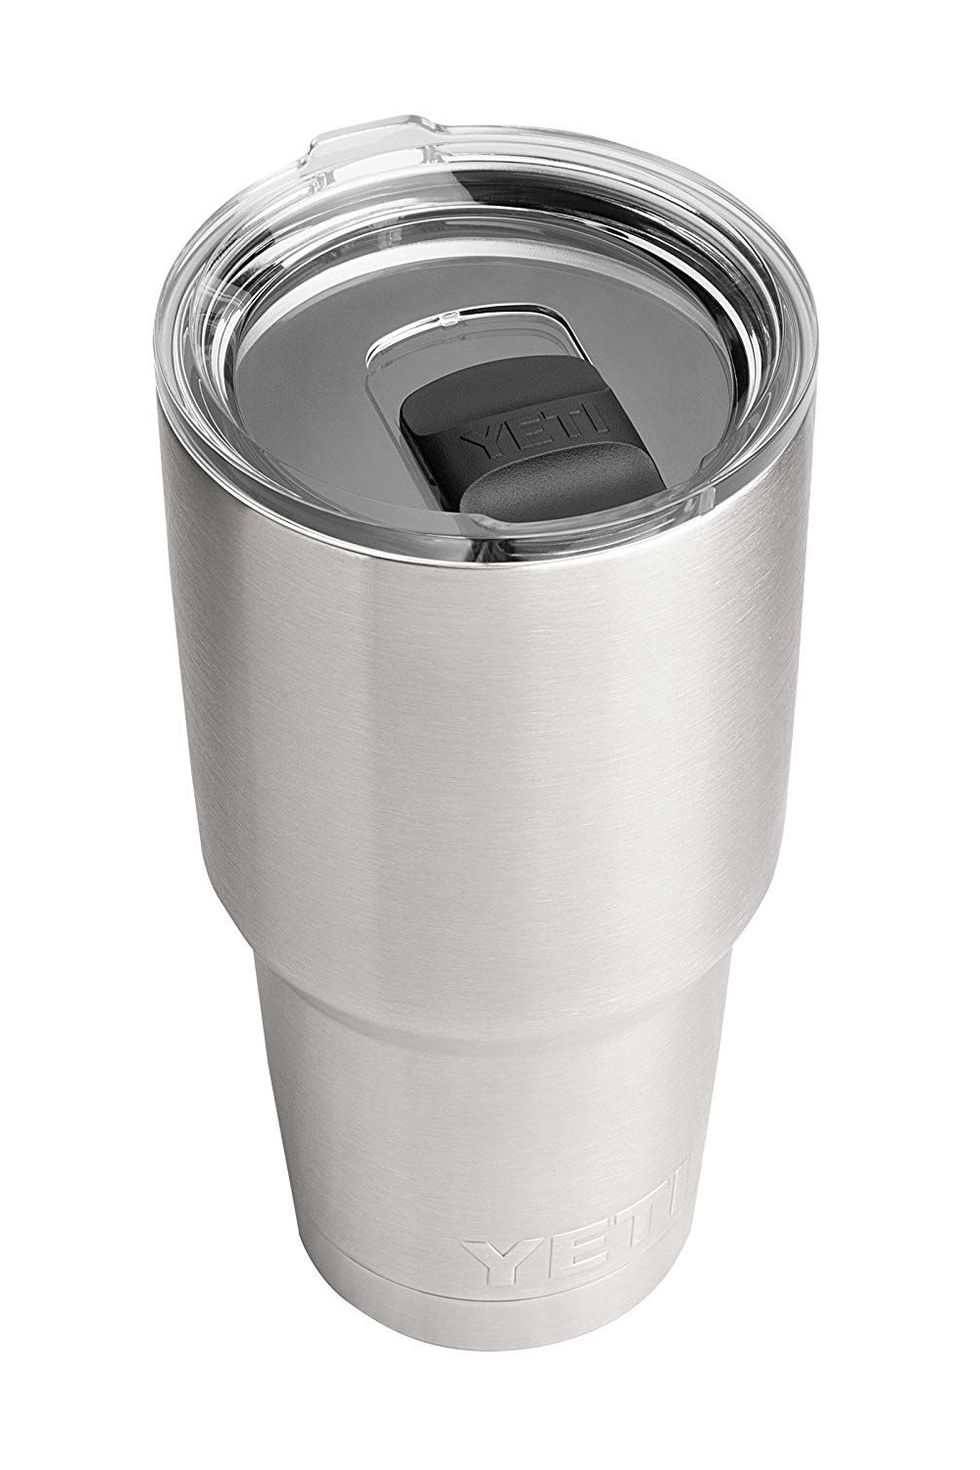 Simple Modern 12oz Insulated Stainless Steel Modern Scout Mug With